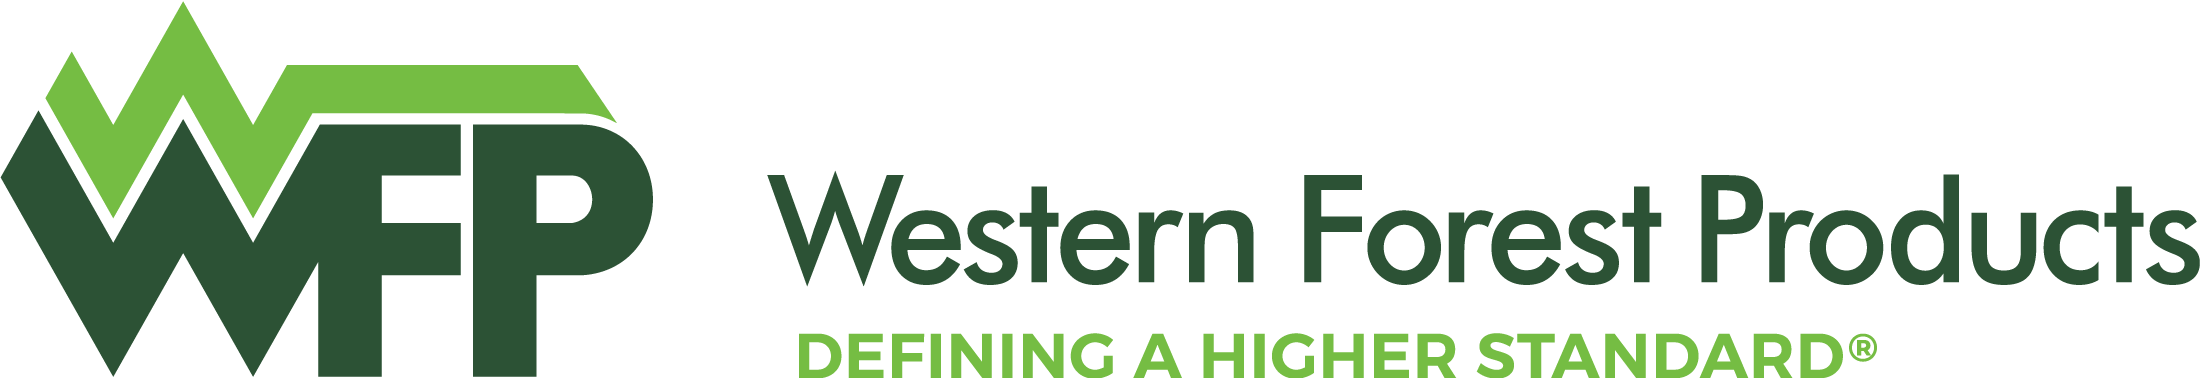 Western Forest Products Logo